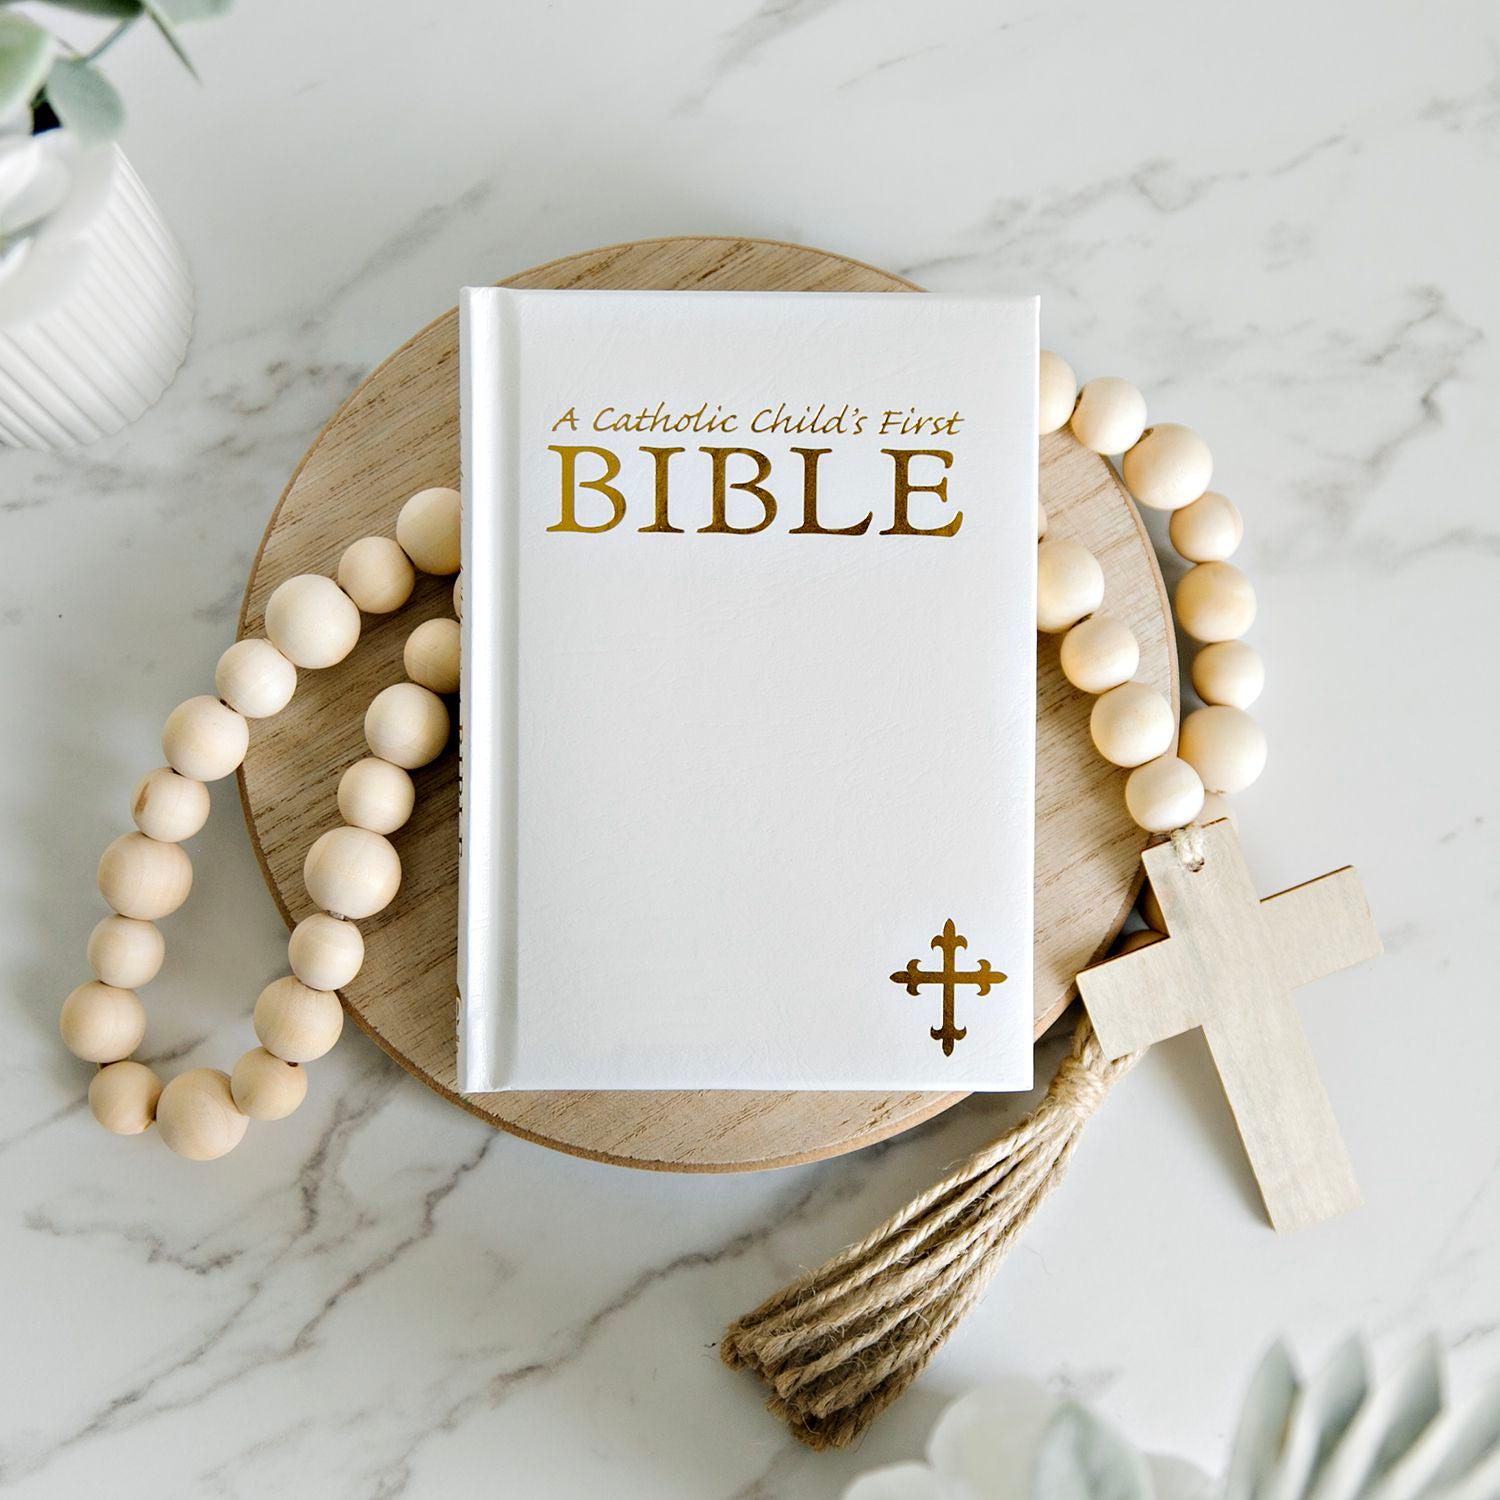 Personalized Illustrated Children's First Bible - Catholic